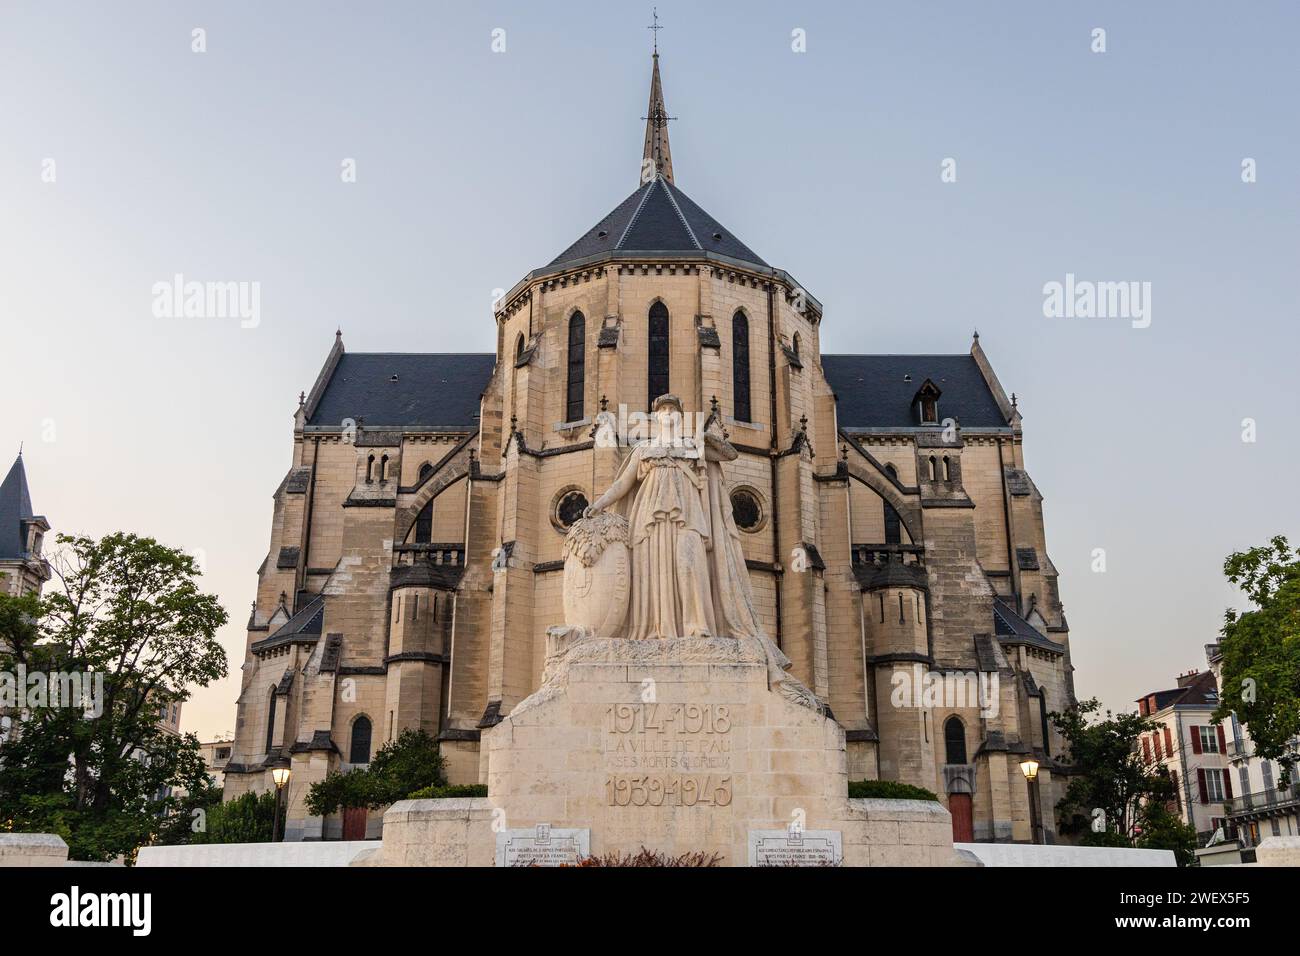 The war memorial and Saint-Martin church in the background. Evening. Pau, Pyrénées-Atlantiques, France. Stock Photo